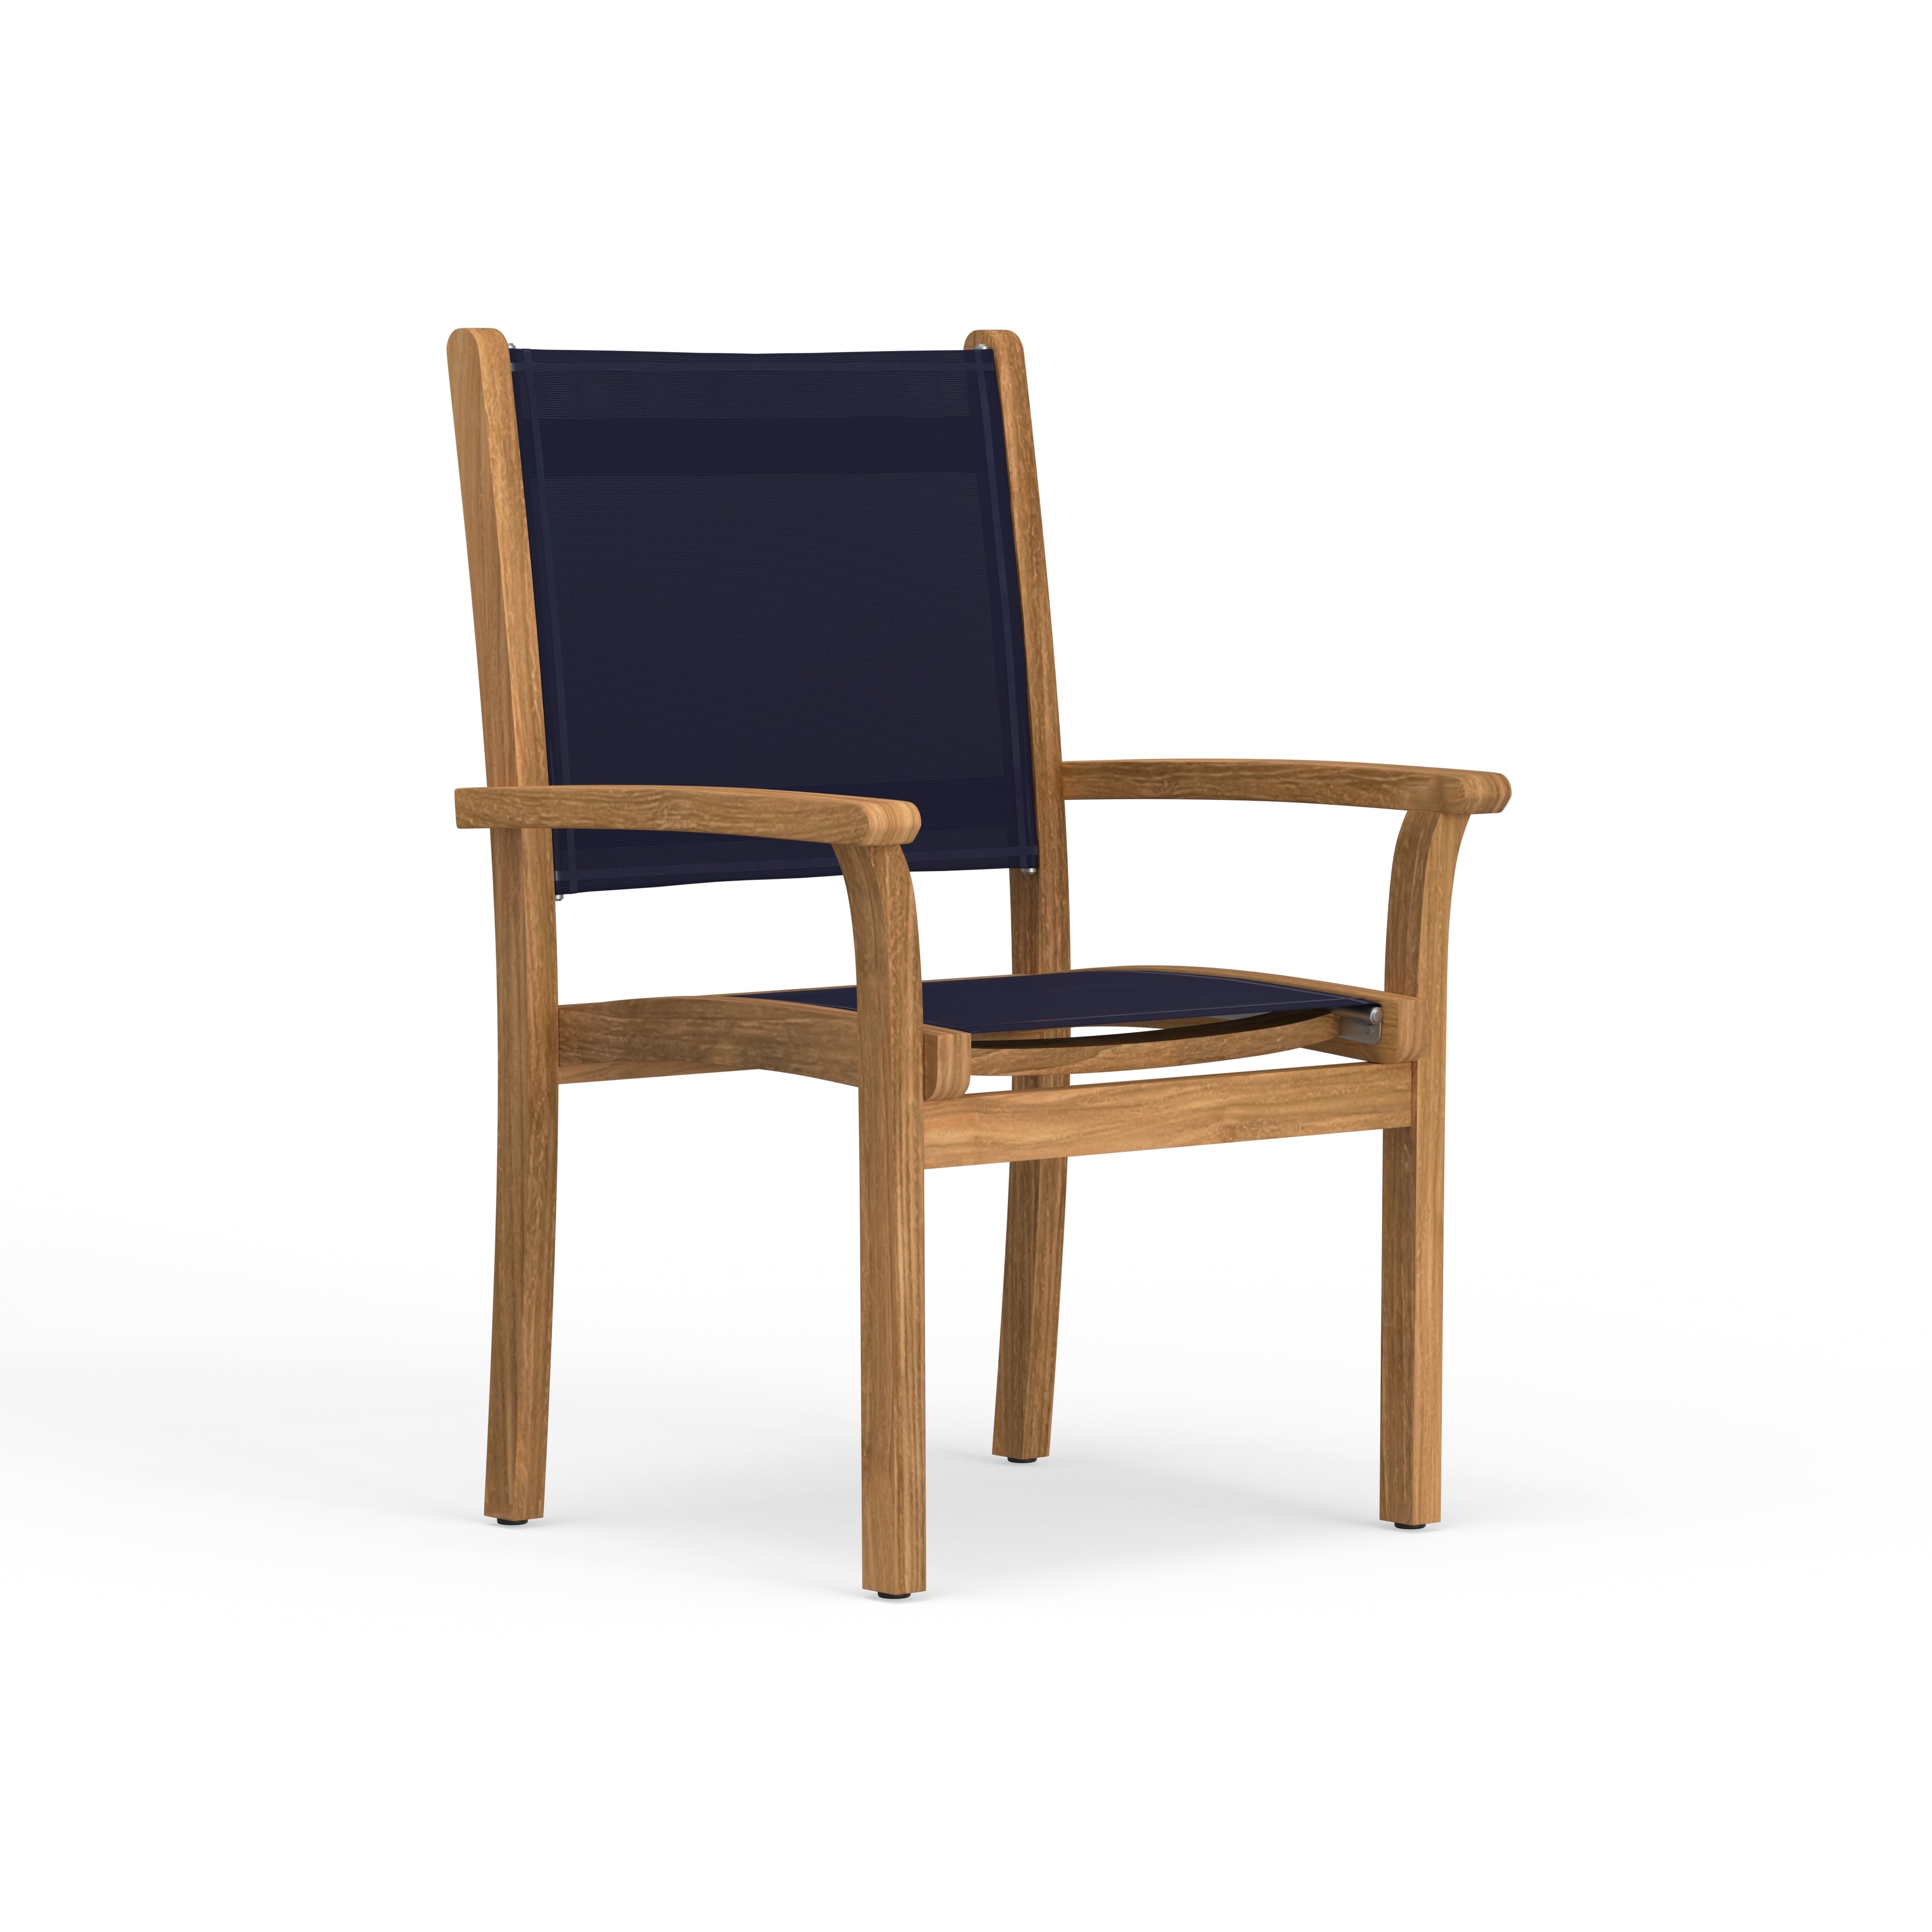 Navy Outdoor Stacking Dining Chair